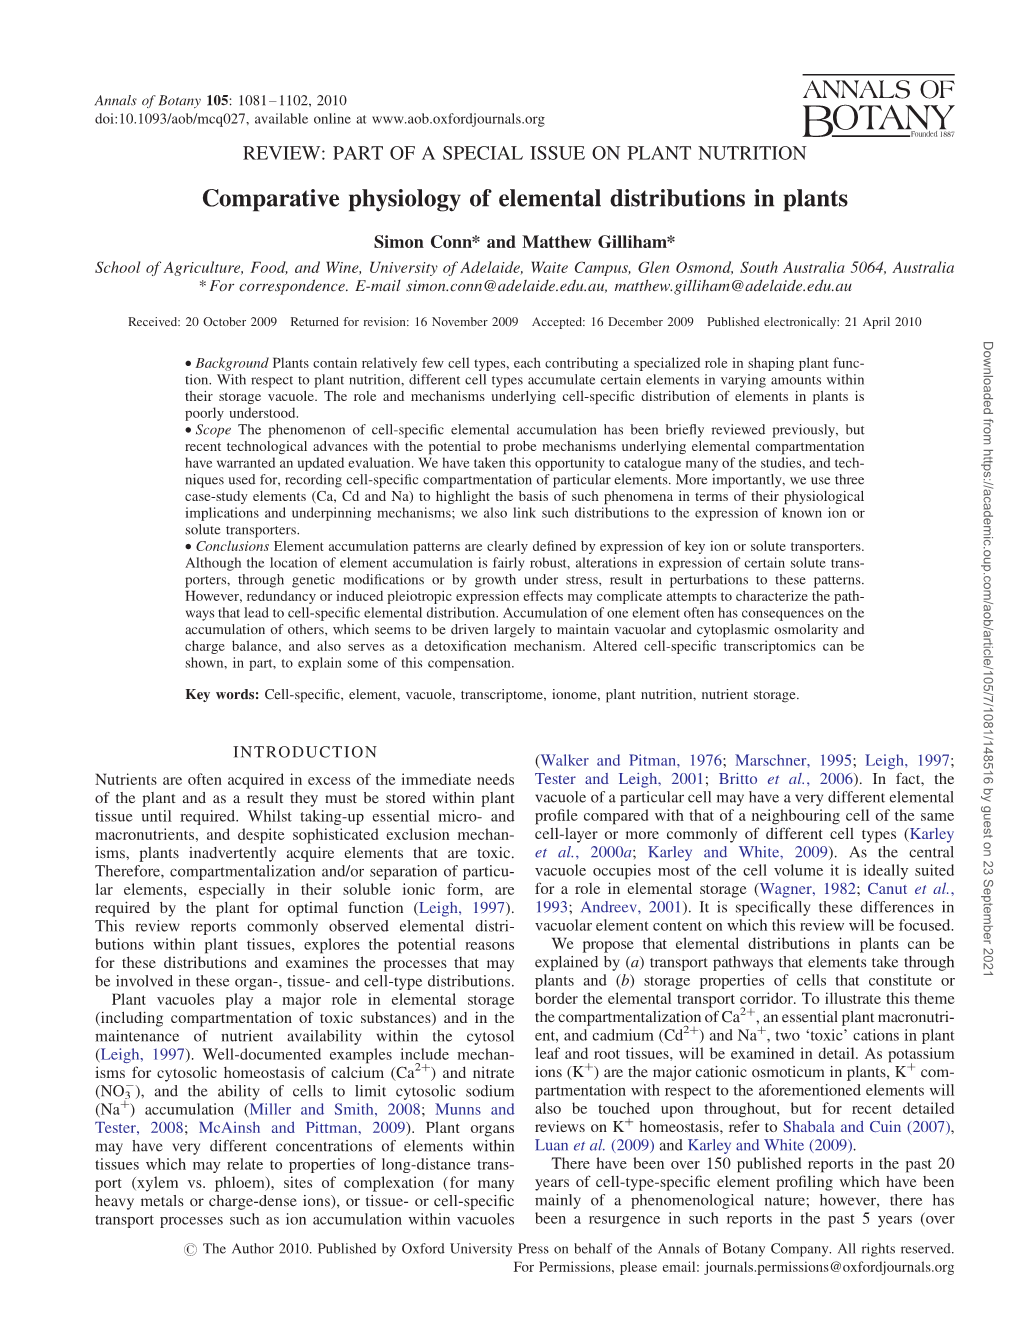 Comparative Physiology of Elemental Distributions in Plants